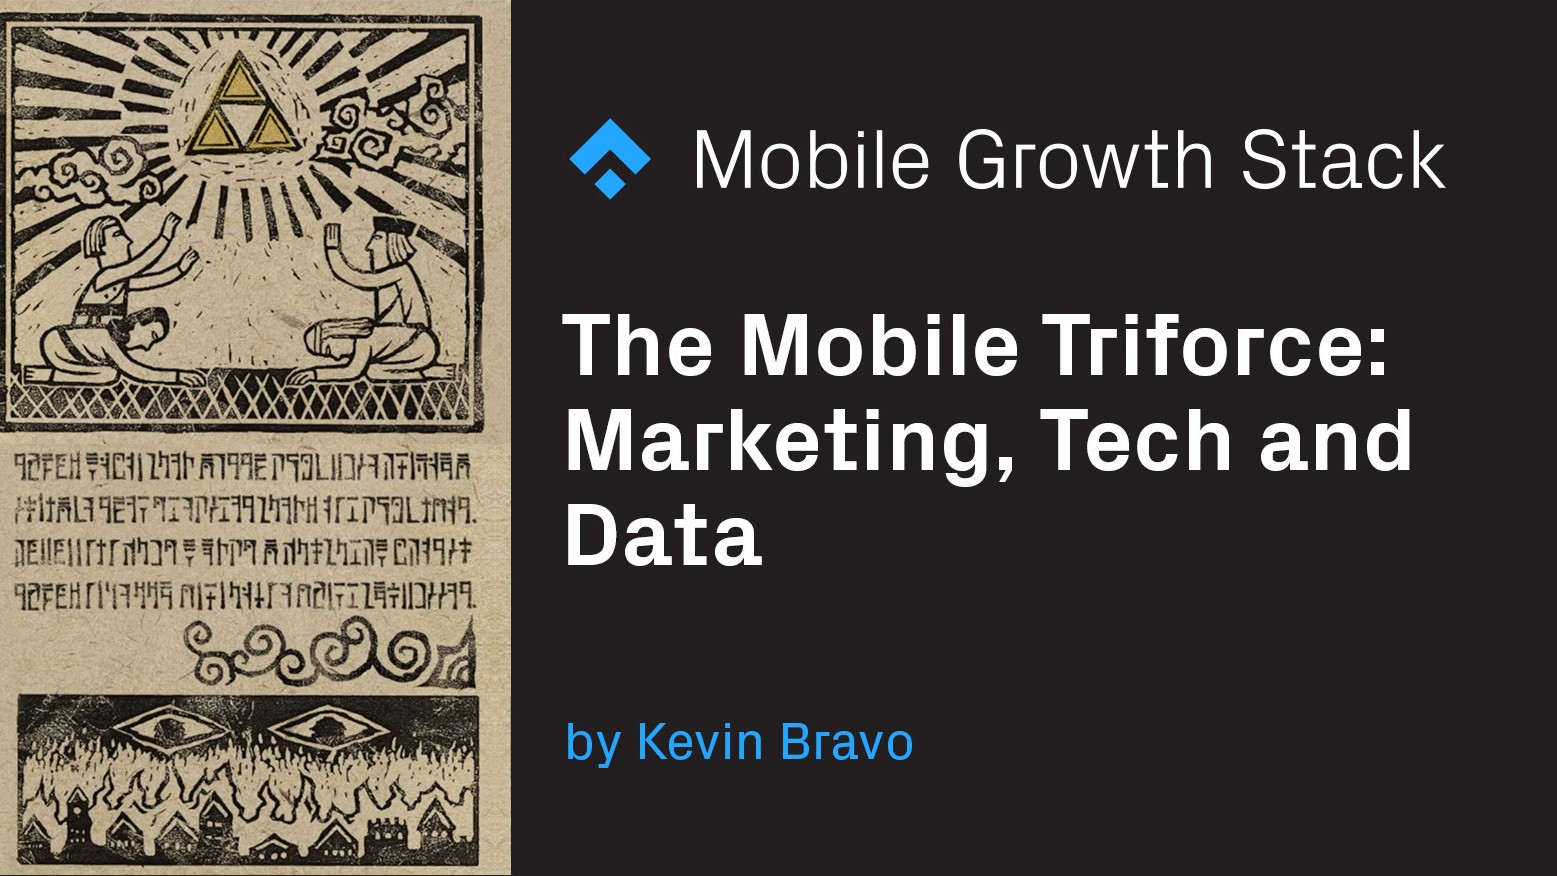 The Mobile Triforce: Marketing, Tech, and Data.